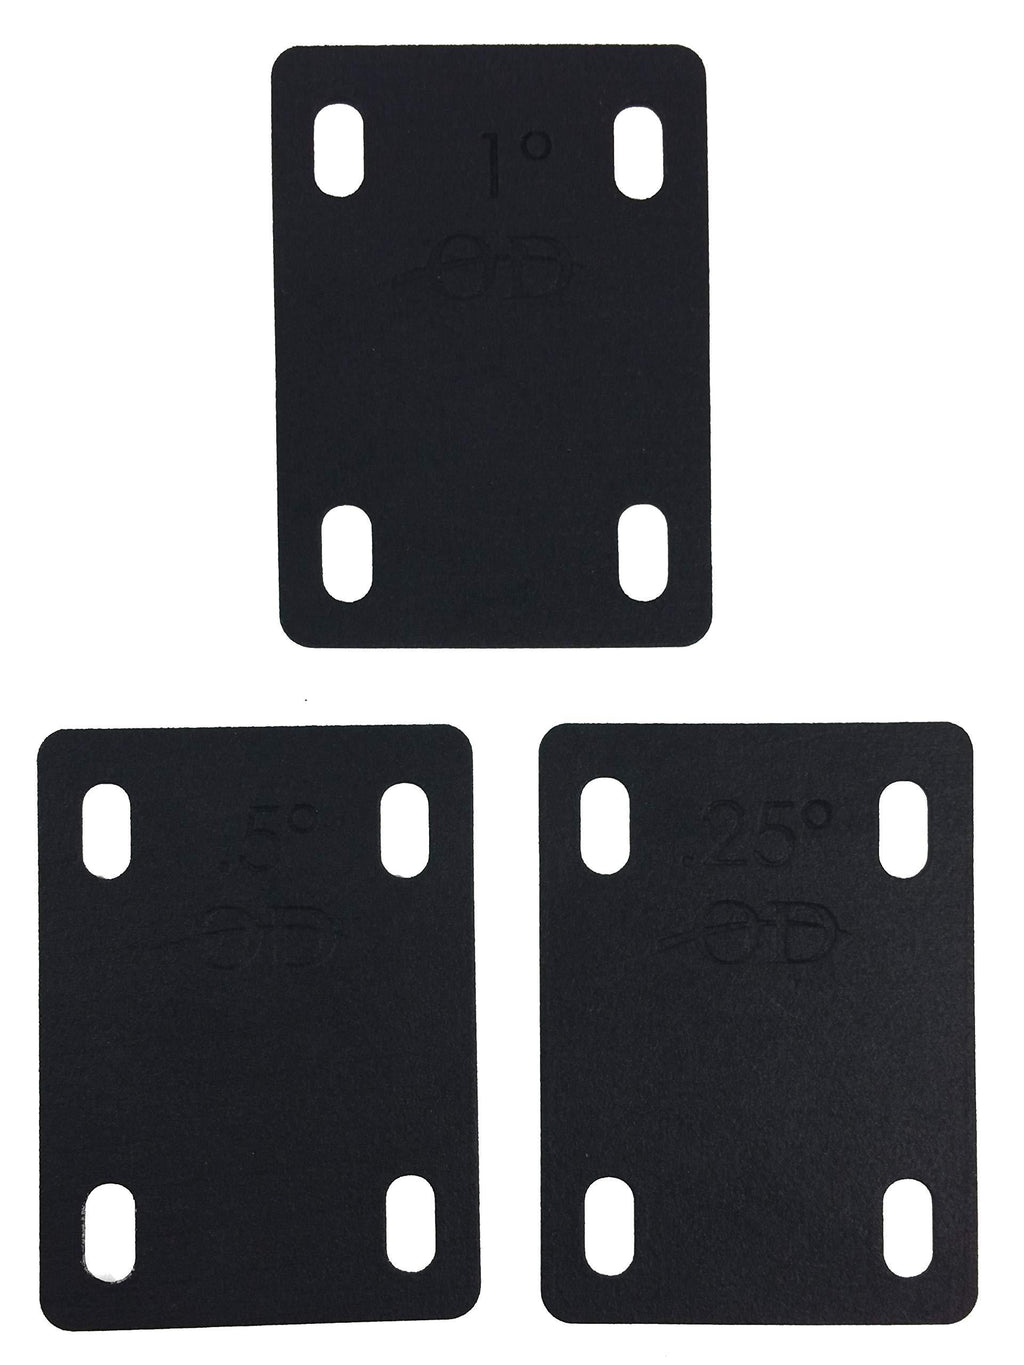 Outback Designs Guitar Neck Shims – Durable Bolt-On Neck Plate for Guitar and Bass Repair – Protective Guitar Neck Gasket made from Flexible Nylon – 0.25°, 0.5°, and 1°Degree Guitar Shims - Set of 3 Black